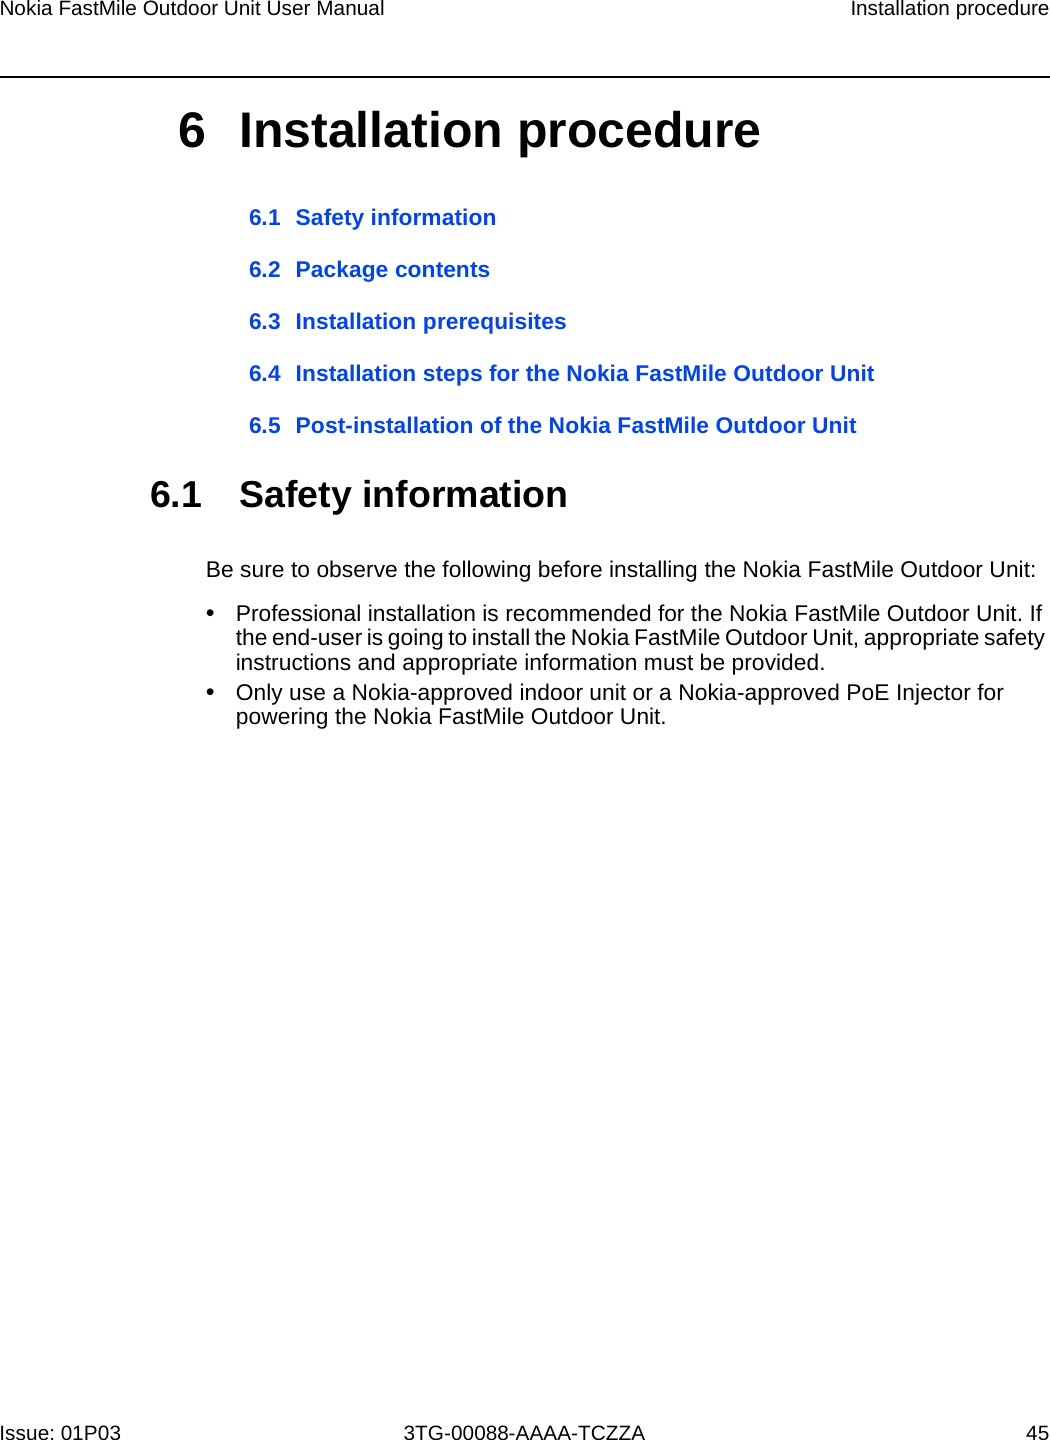 Page 40 of Nokia Bell 34003800FM20 FastMile Compact User Manual Nokia FastMile Outdoor Unit